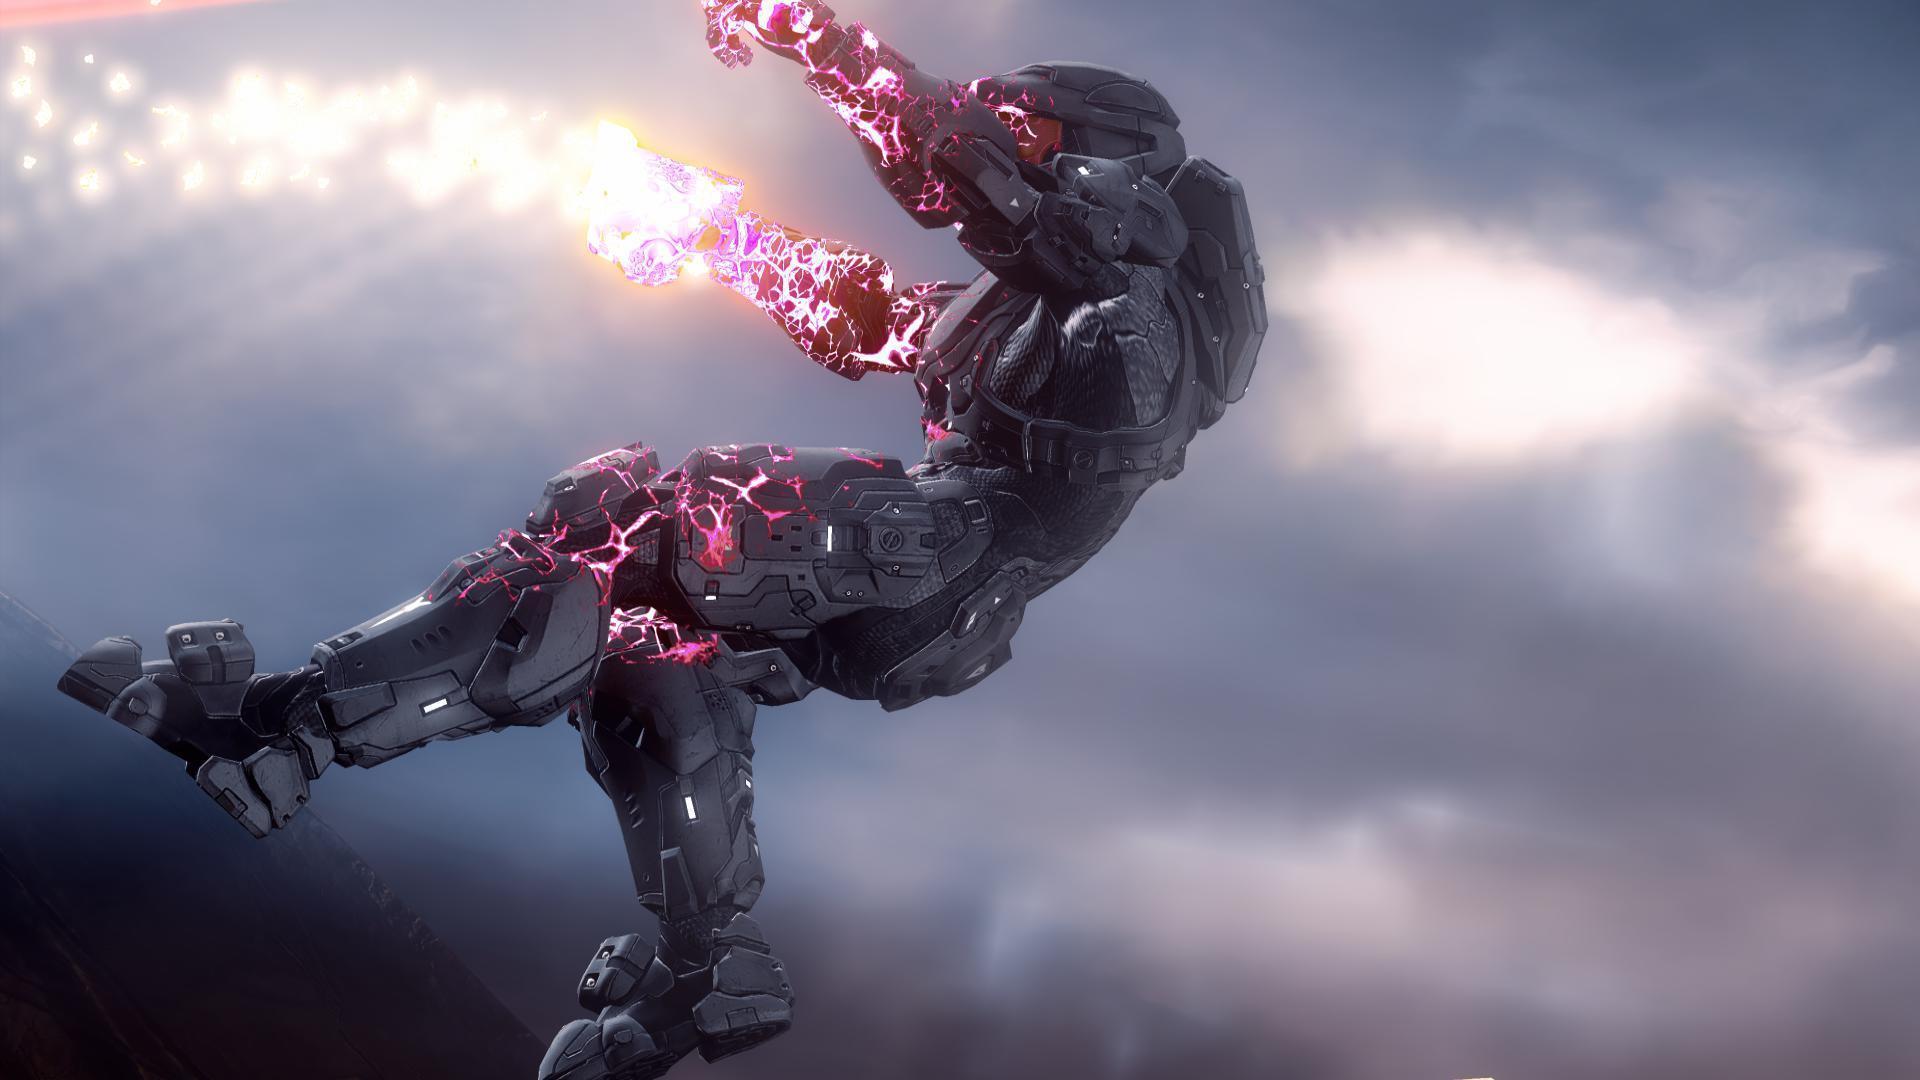 Halo 4 Wallpaper and Background